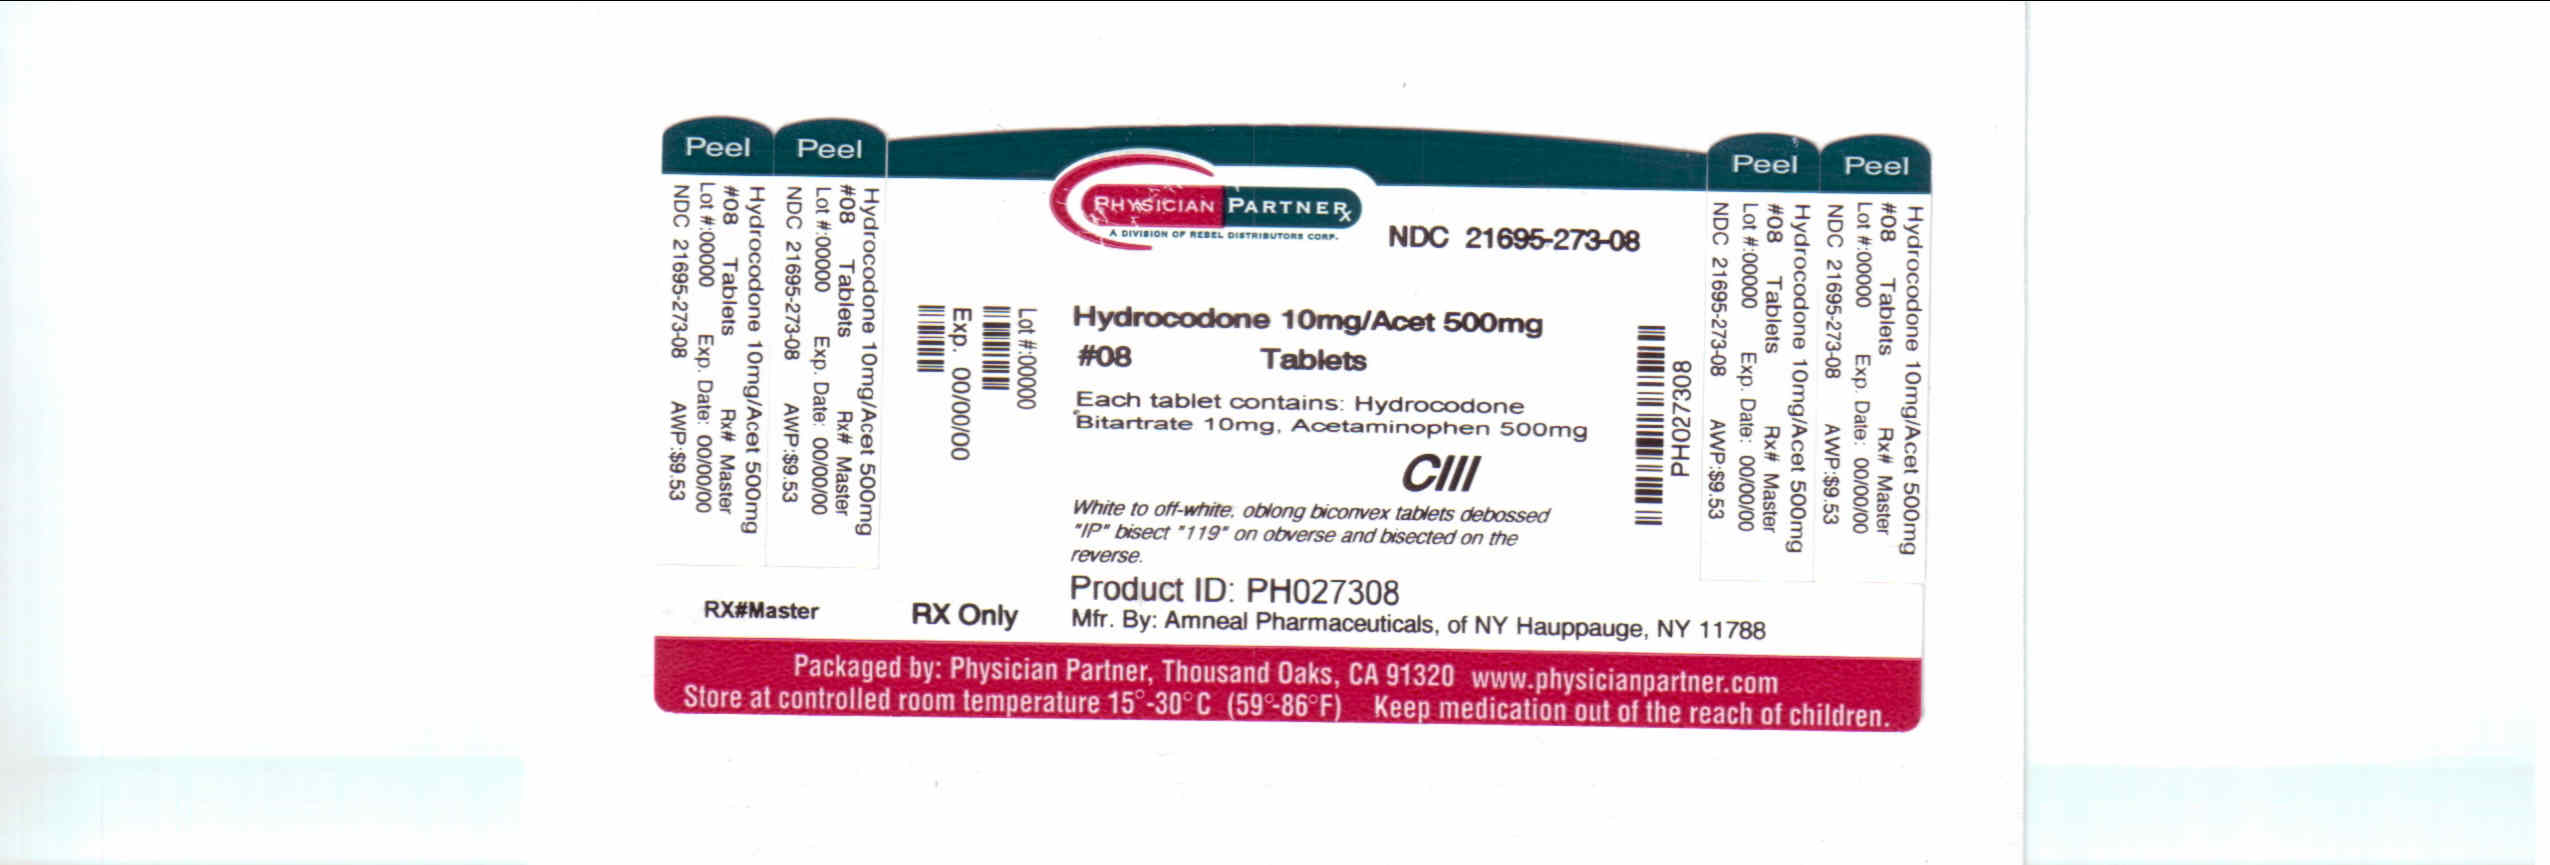 Hydorcodone 10mg/Acet 500mg